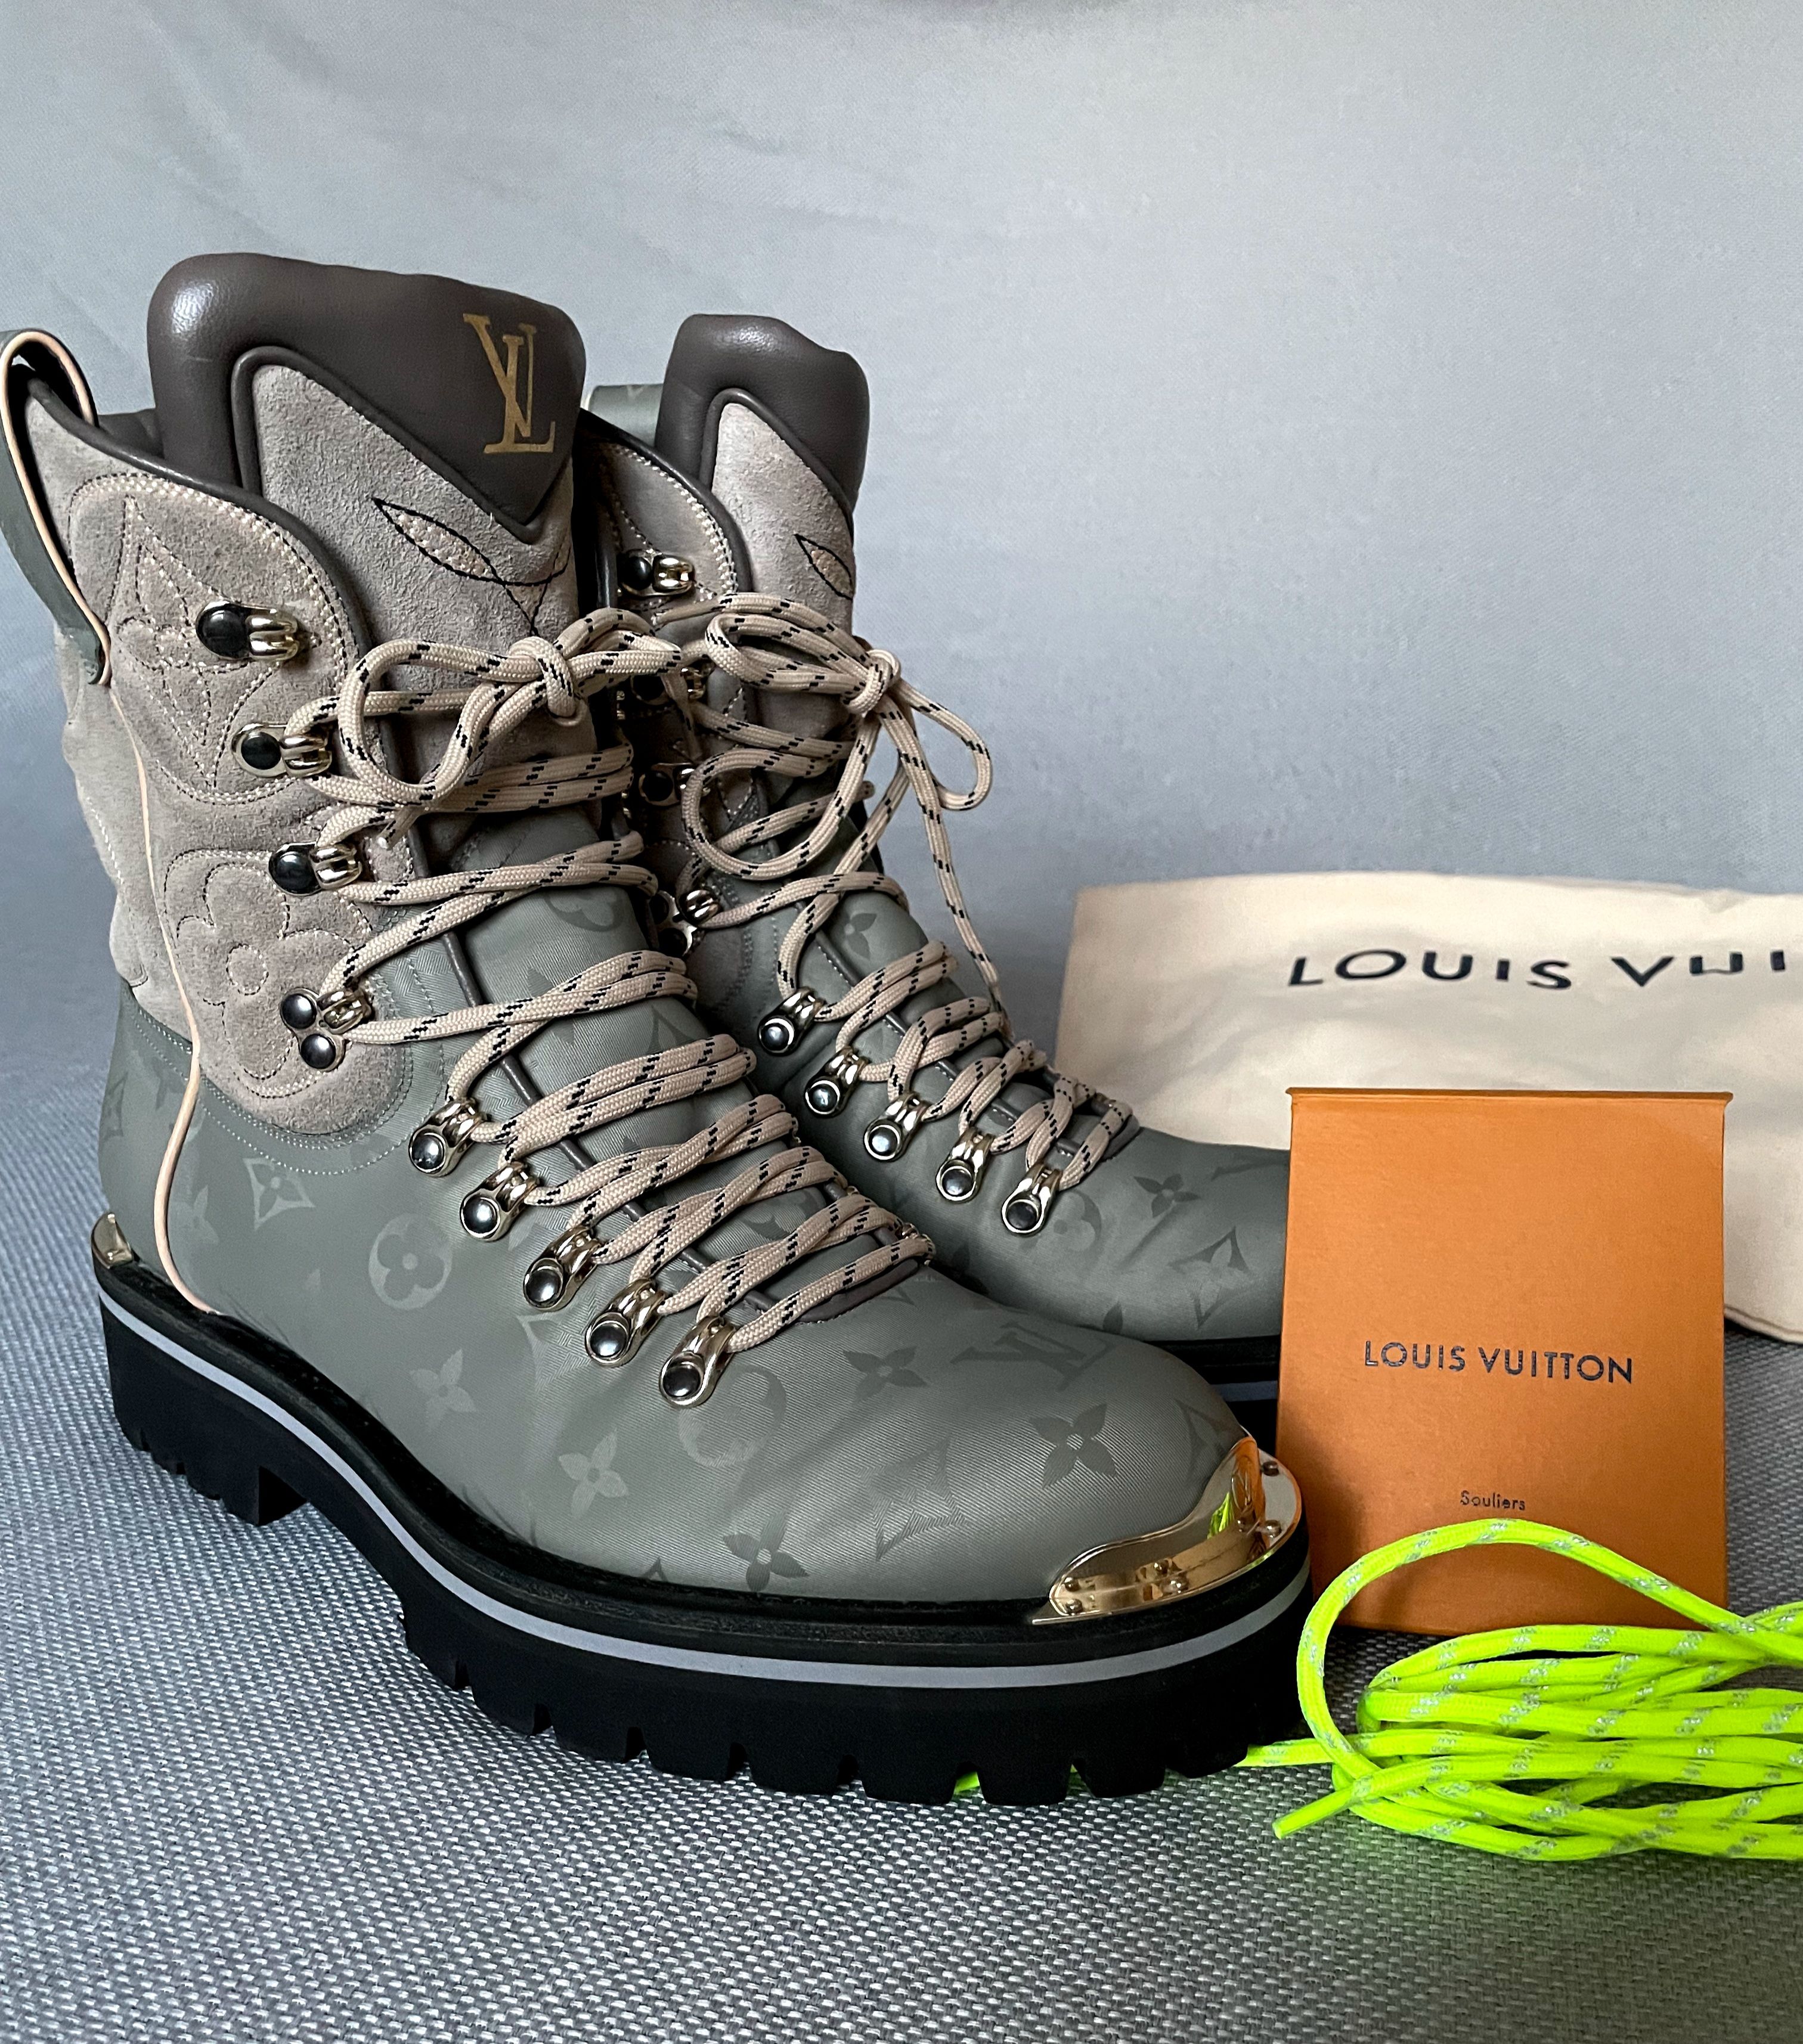 Louis Vuitton 2018 Outland Boots w/ Tags - Grey Boots, Shoes